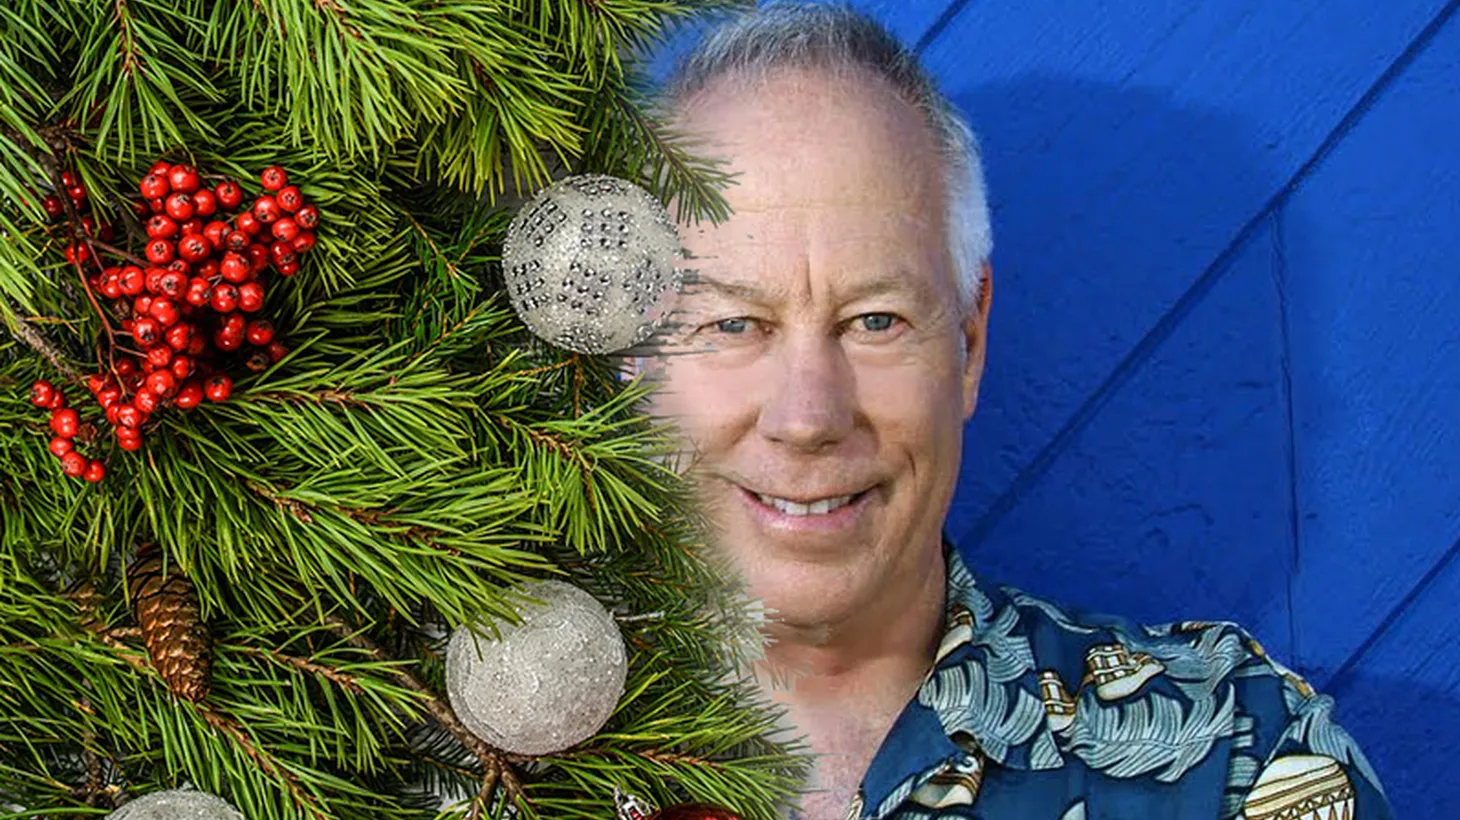 Rhythm Planet host Tom Schnabel joins us to preview his annual Christmas Becomes Eclectic program. He brings some Christmas calypso, a Hawaiian holiday celebration and a beloved classic.  (10am)